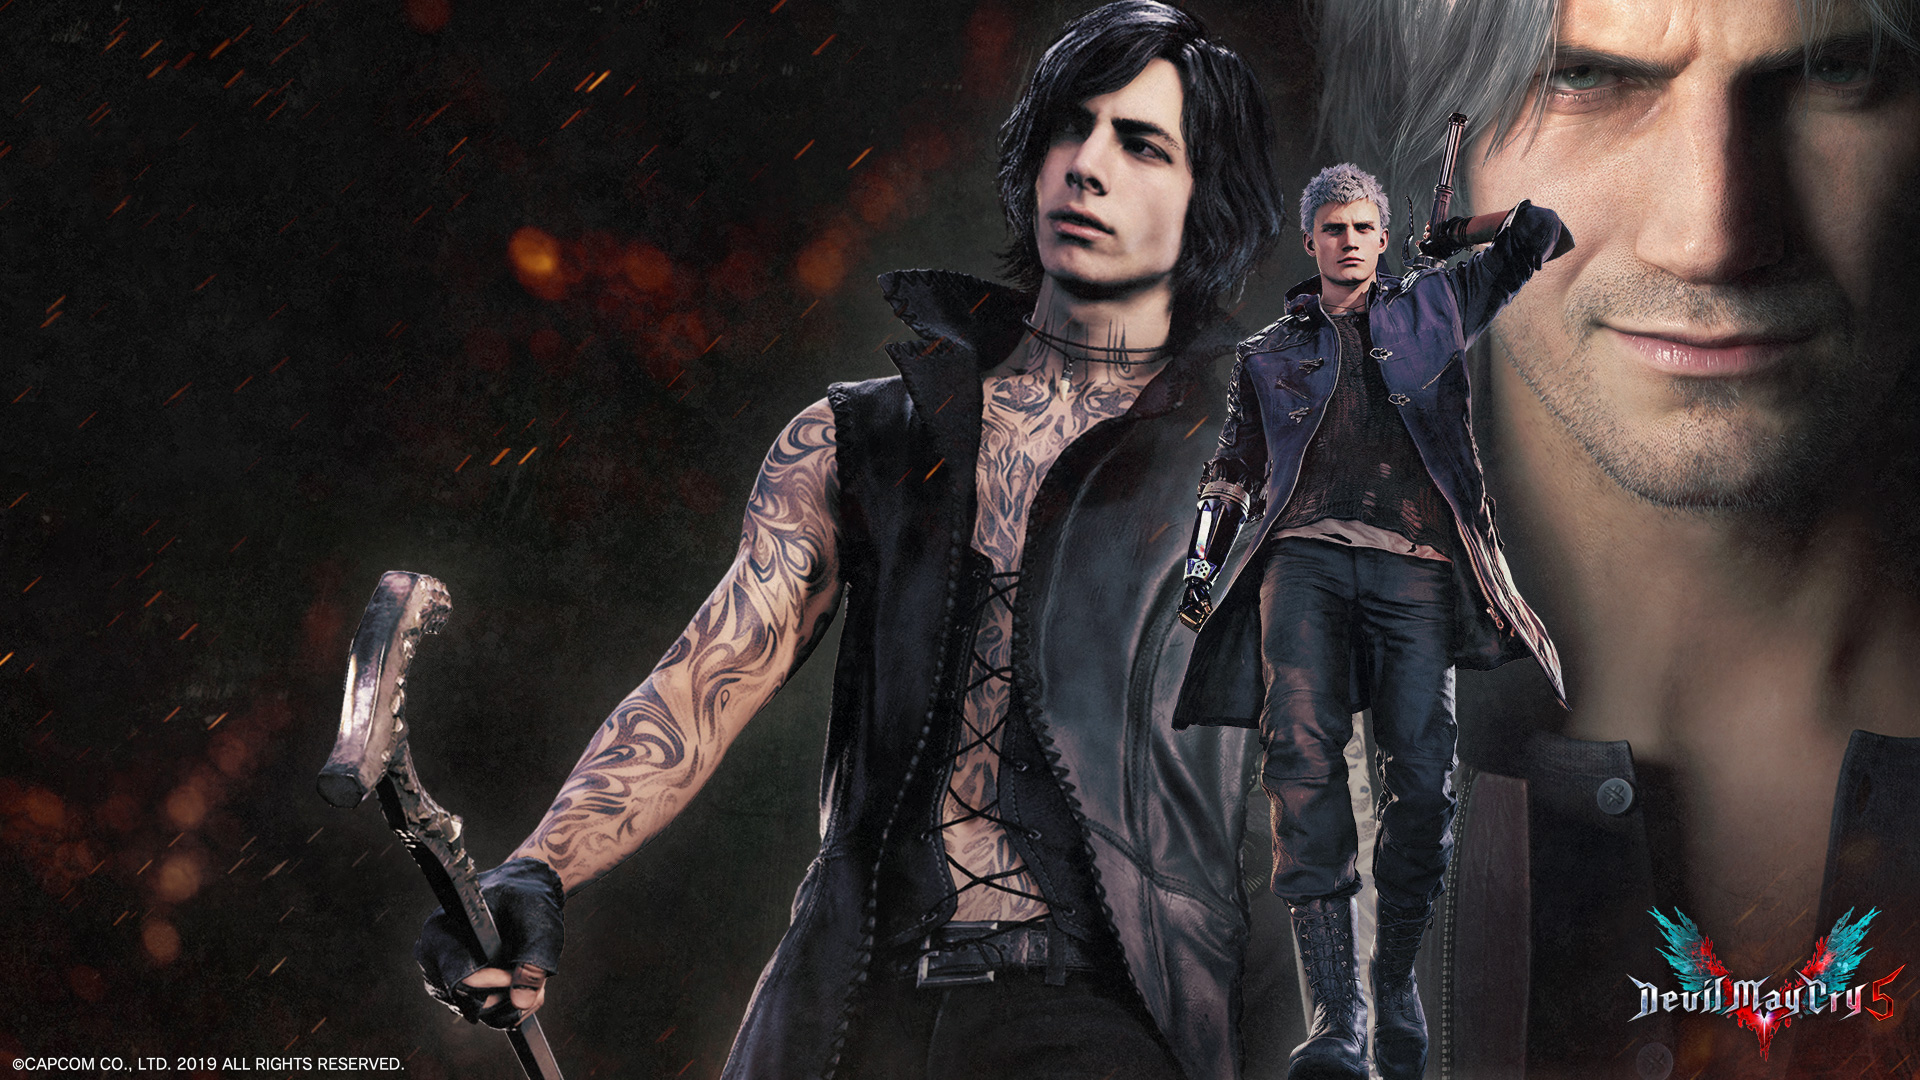 Dante Devil May Cry Devil May Cry 5 Nero Devil May Cry V Devil May Cry 1920x1080